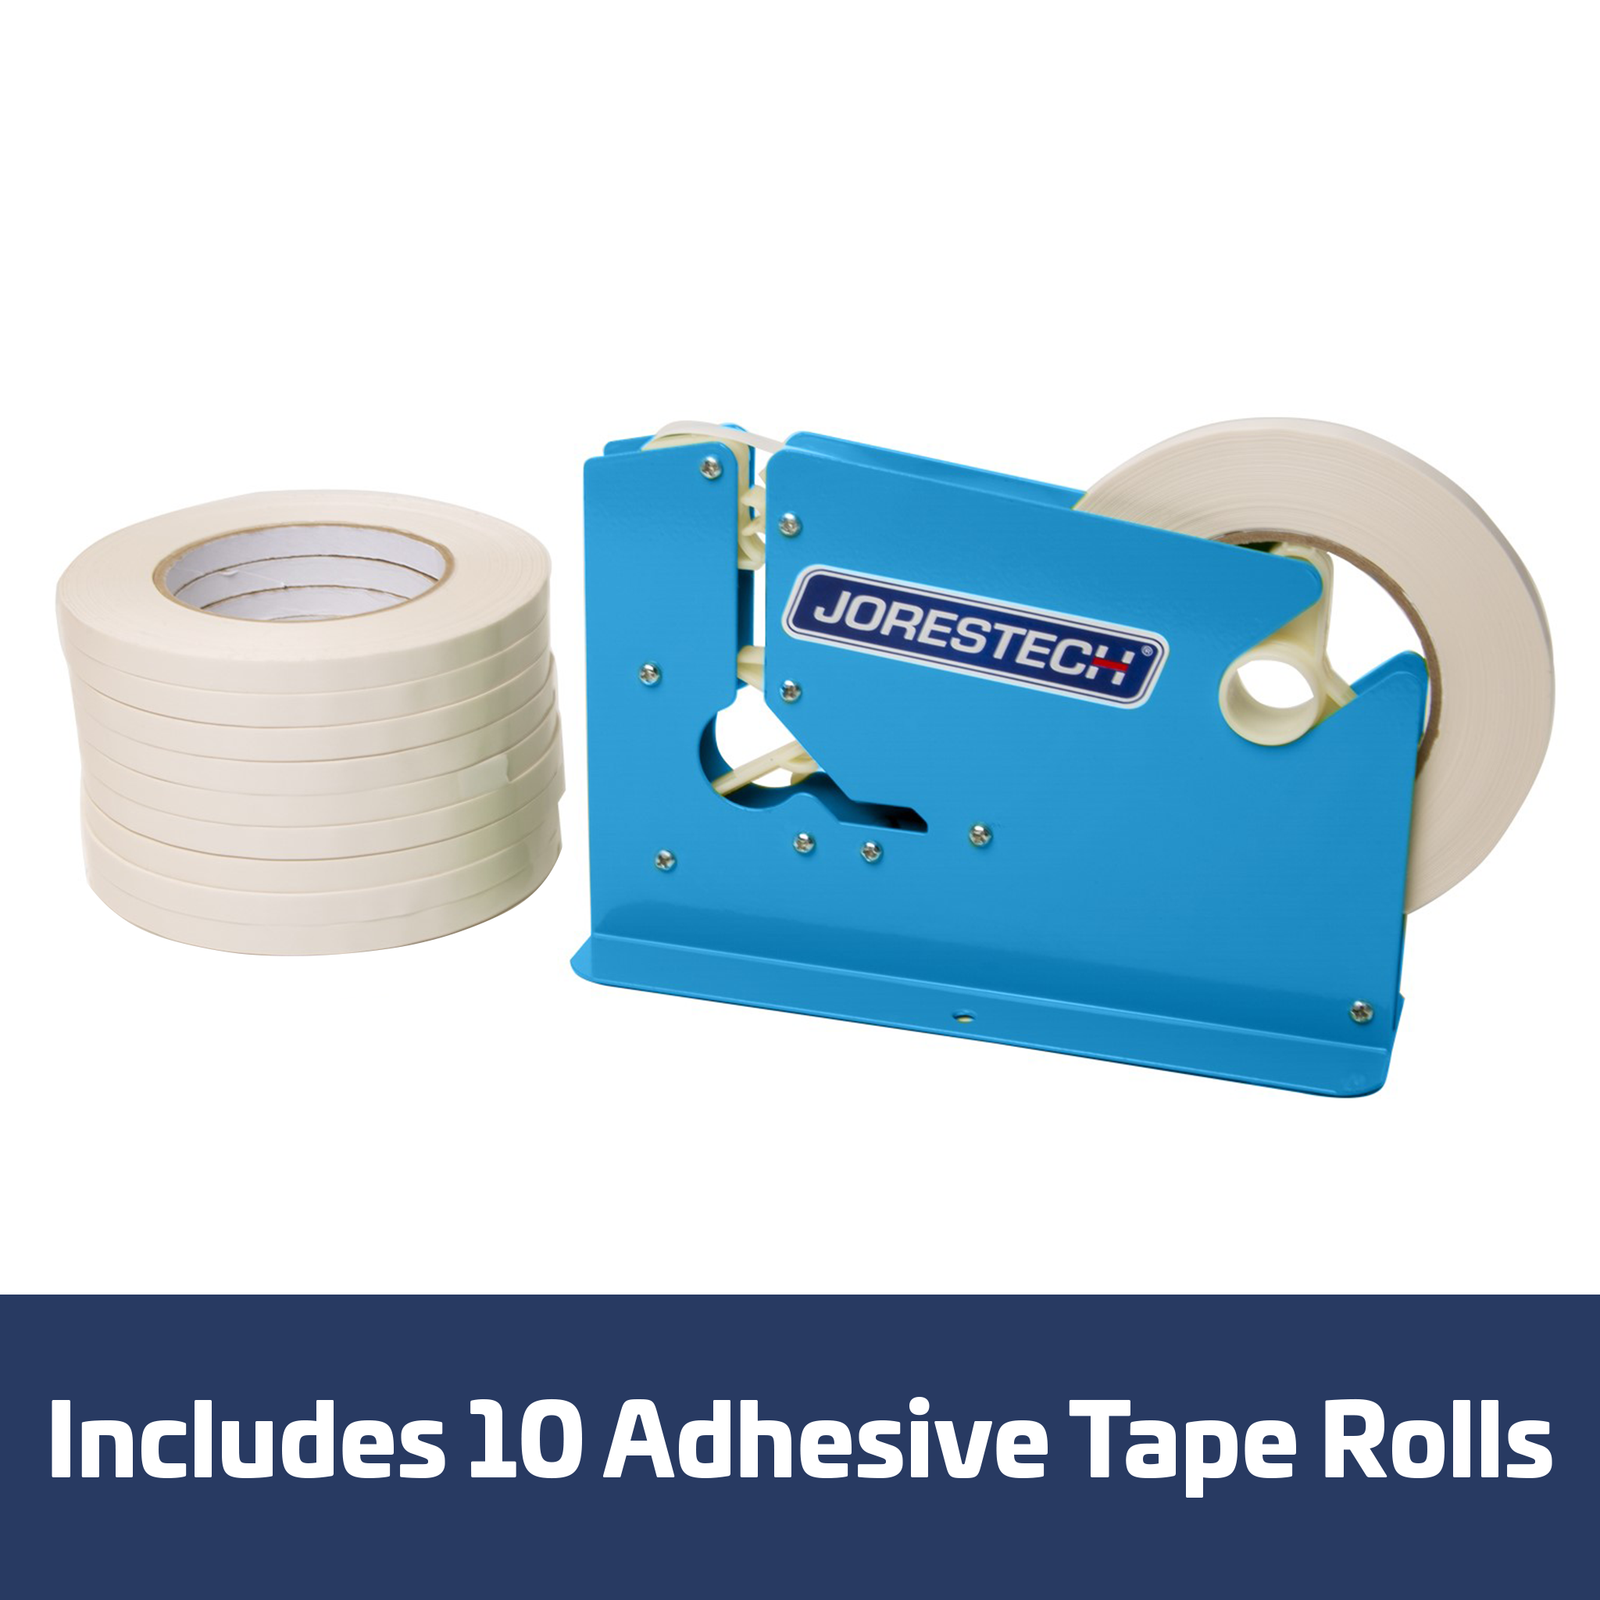 A powder coated bag closer next to 10 white tape rolls. Blue and white banner reads Includes 10 adhesive tape rolls.